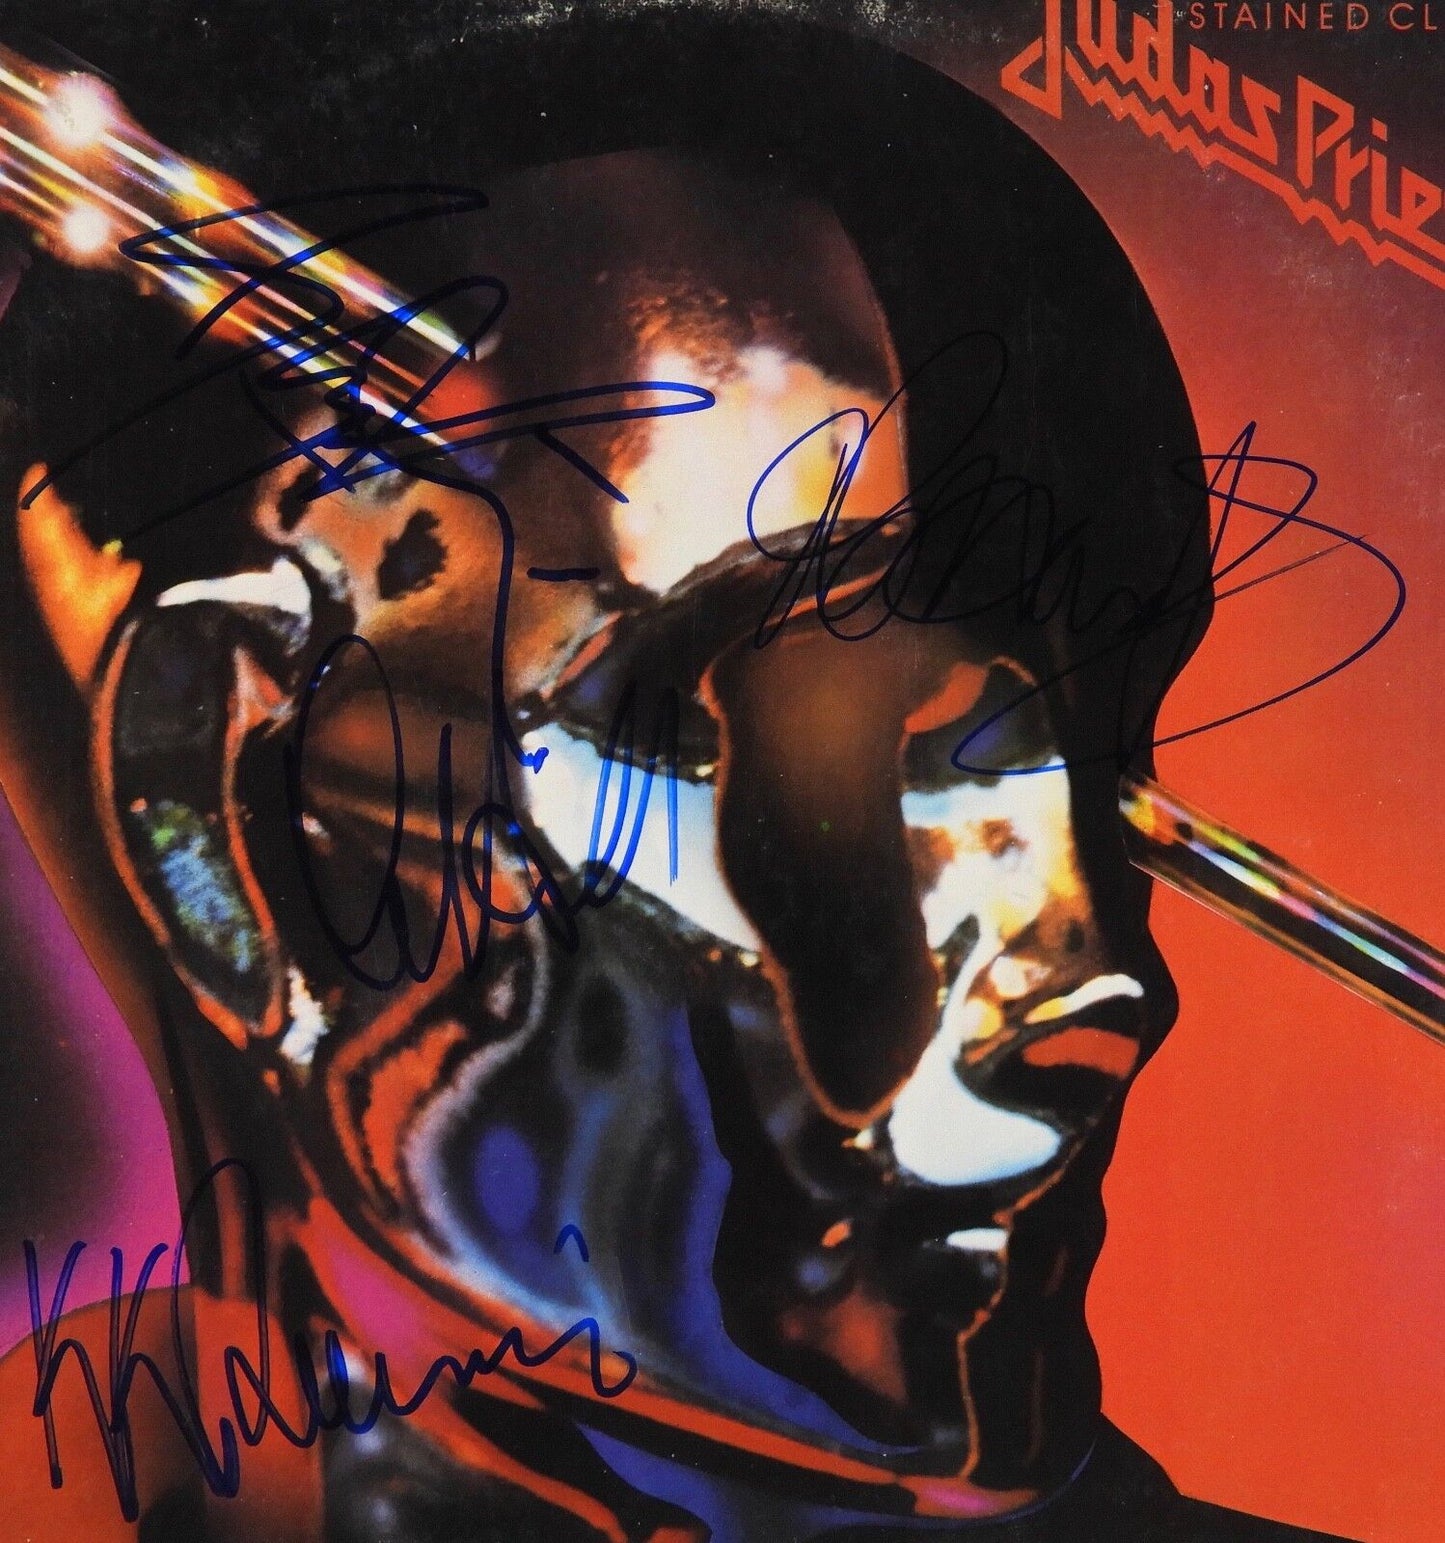 Judas Priest Stained Class Band Signed Autograph Record Album JSA Vinyl